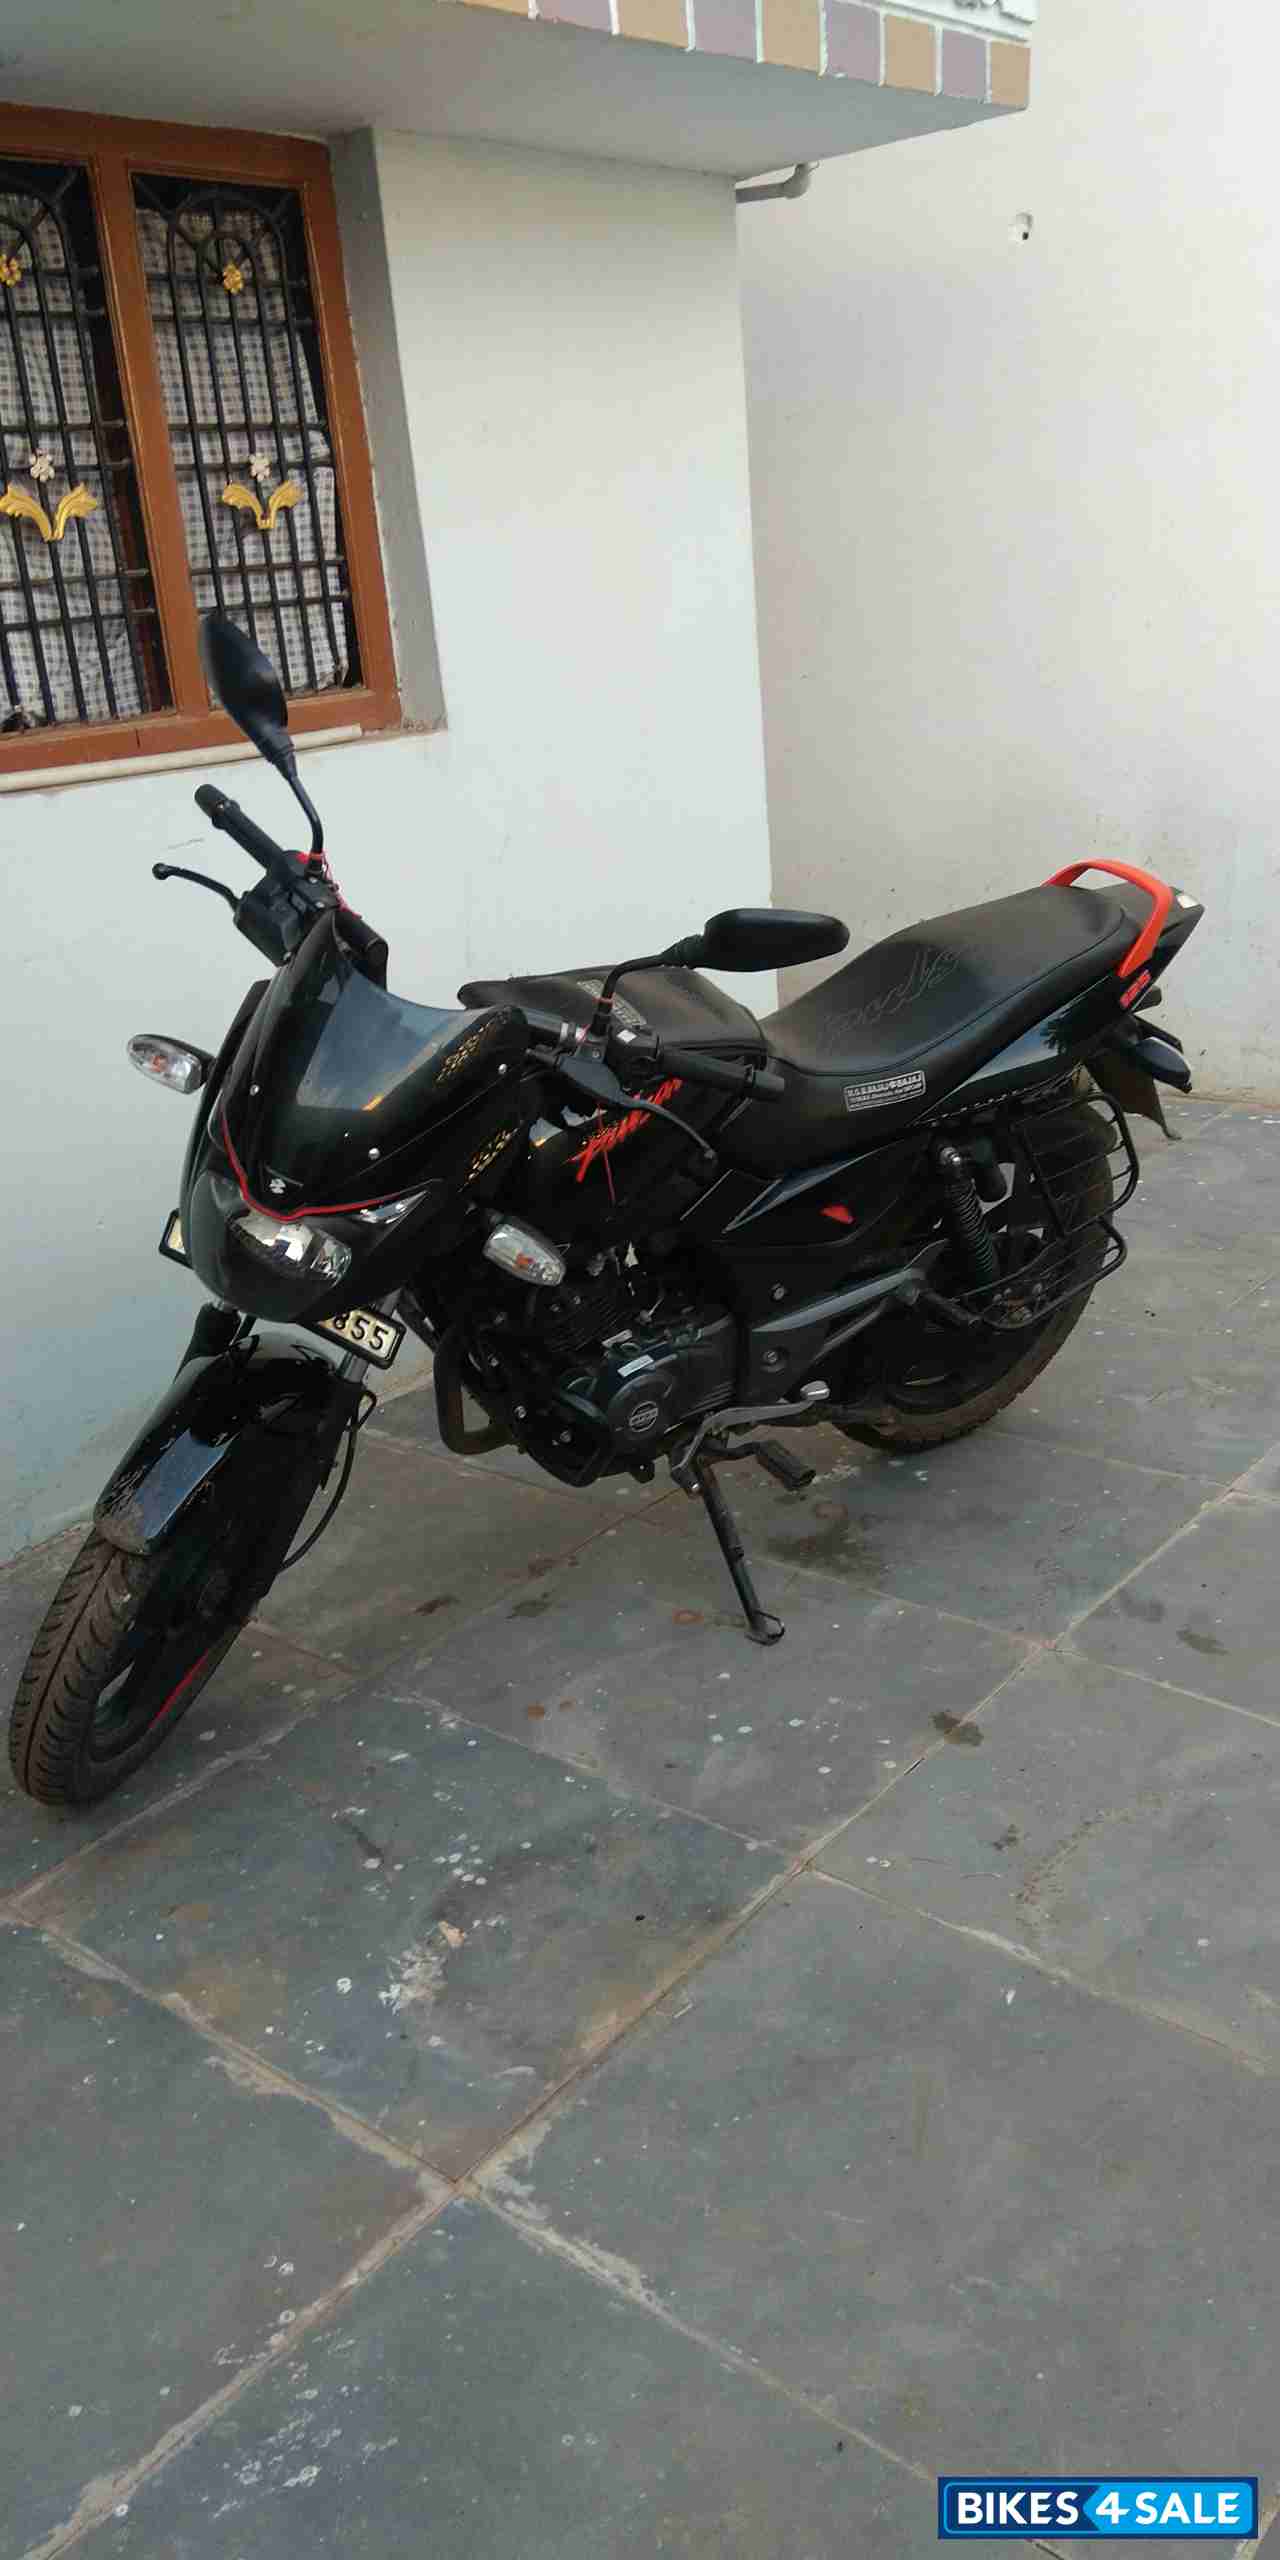 Second Hand Pulsar 125 on Sale, SAVE 58%